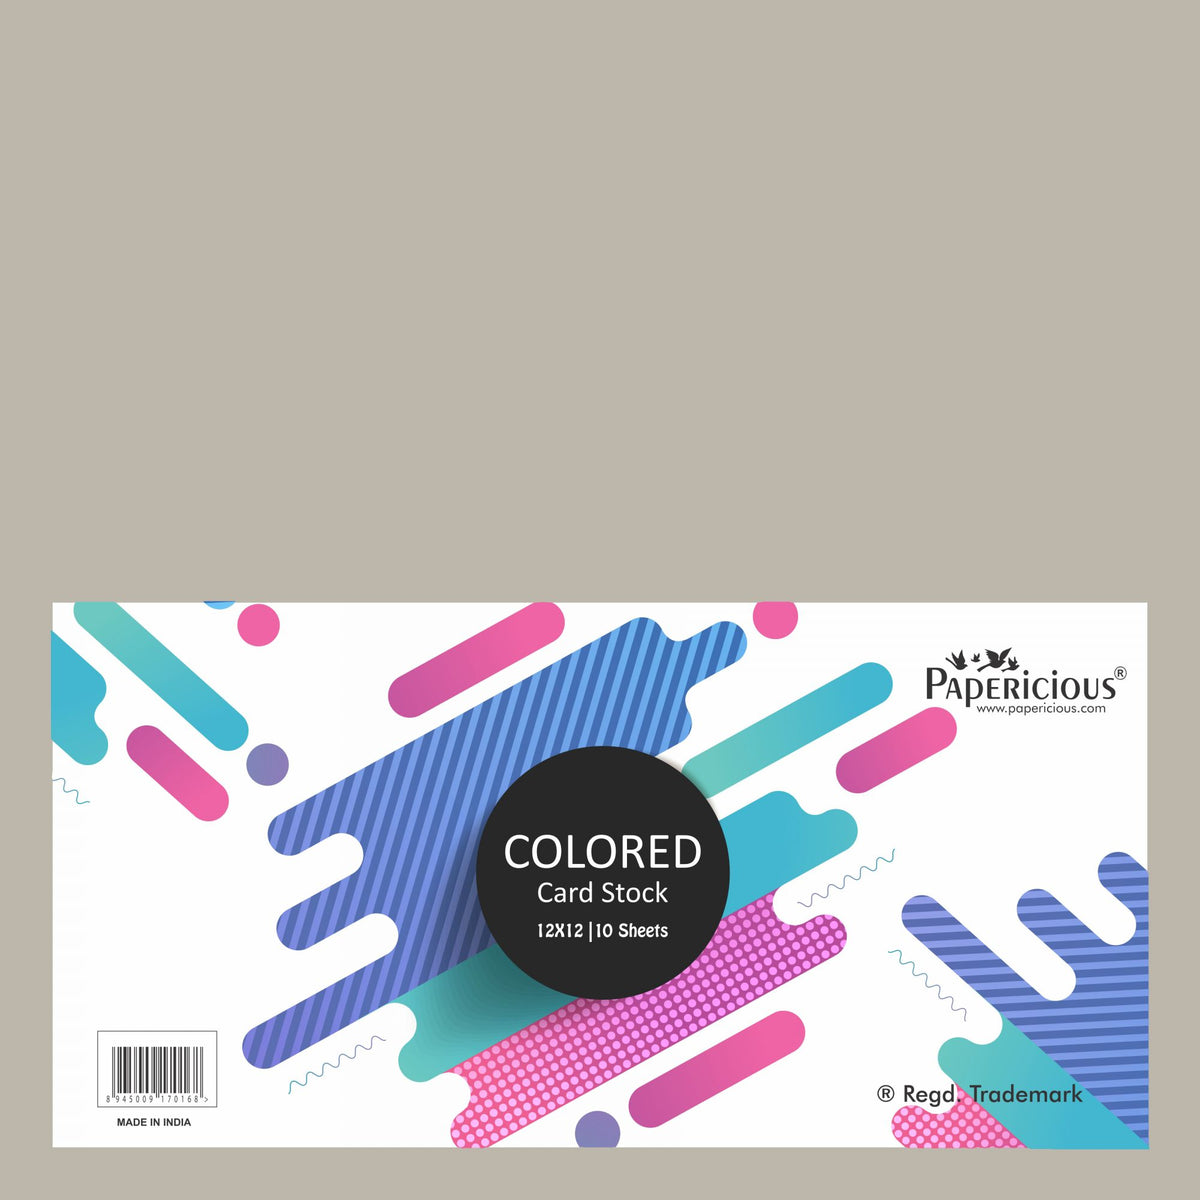 PAPERICIOUS - Colombo - 250GSM Colored Cardstock 12x12 inch / 10 Sheets